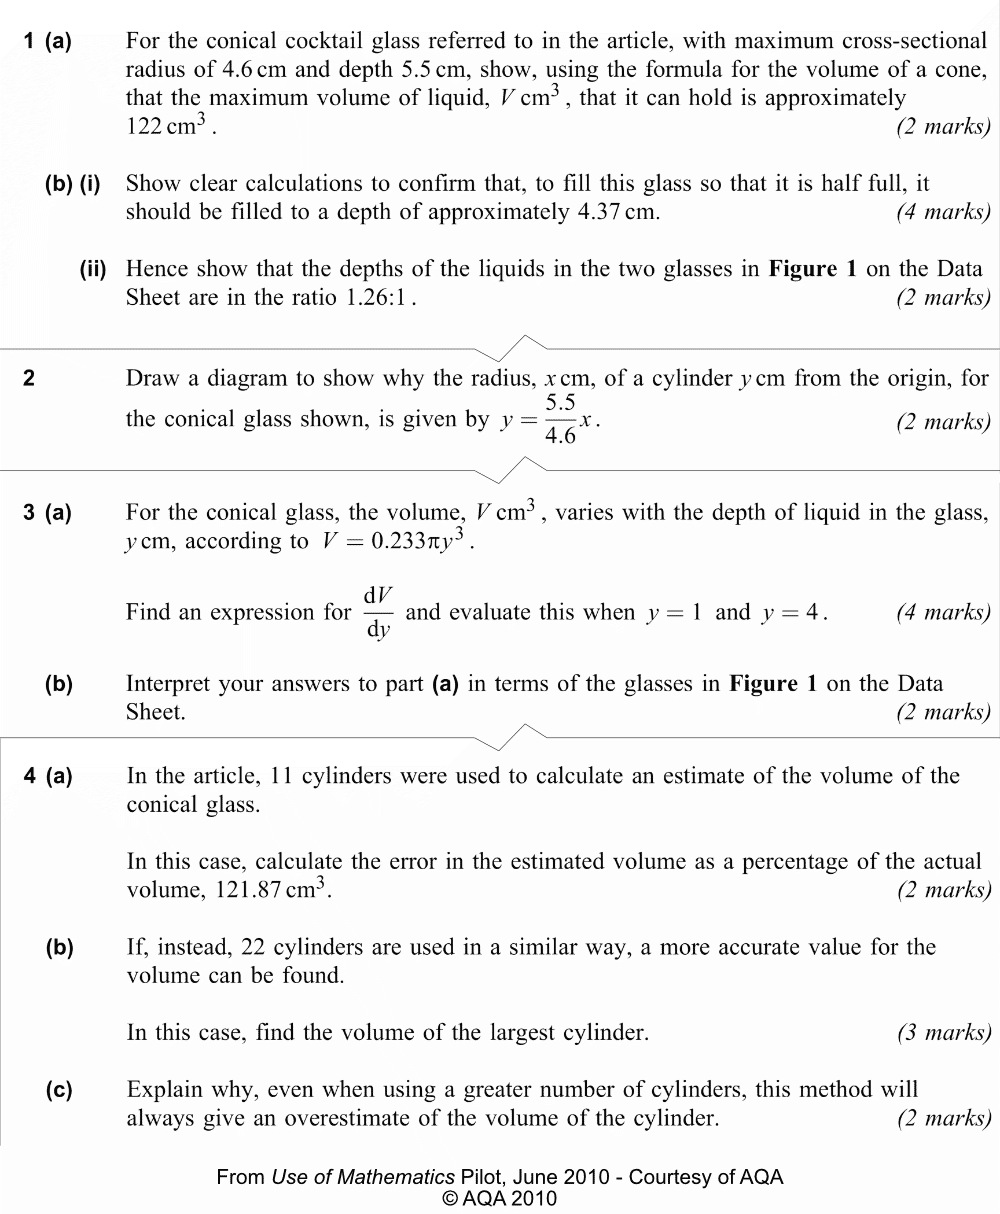 Questions from AQA test